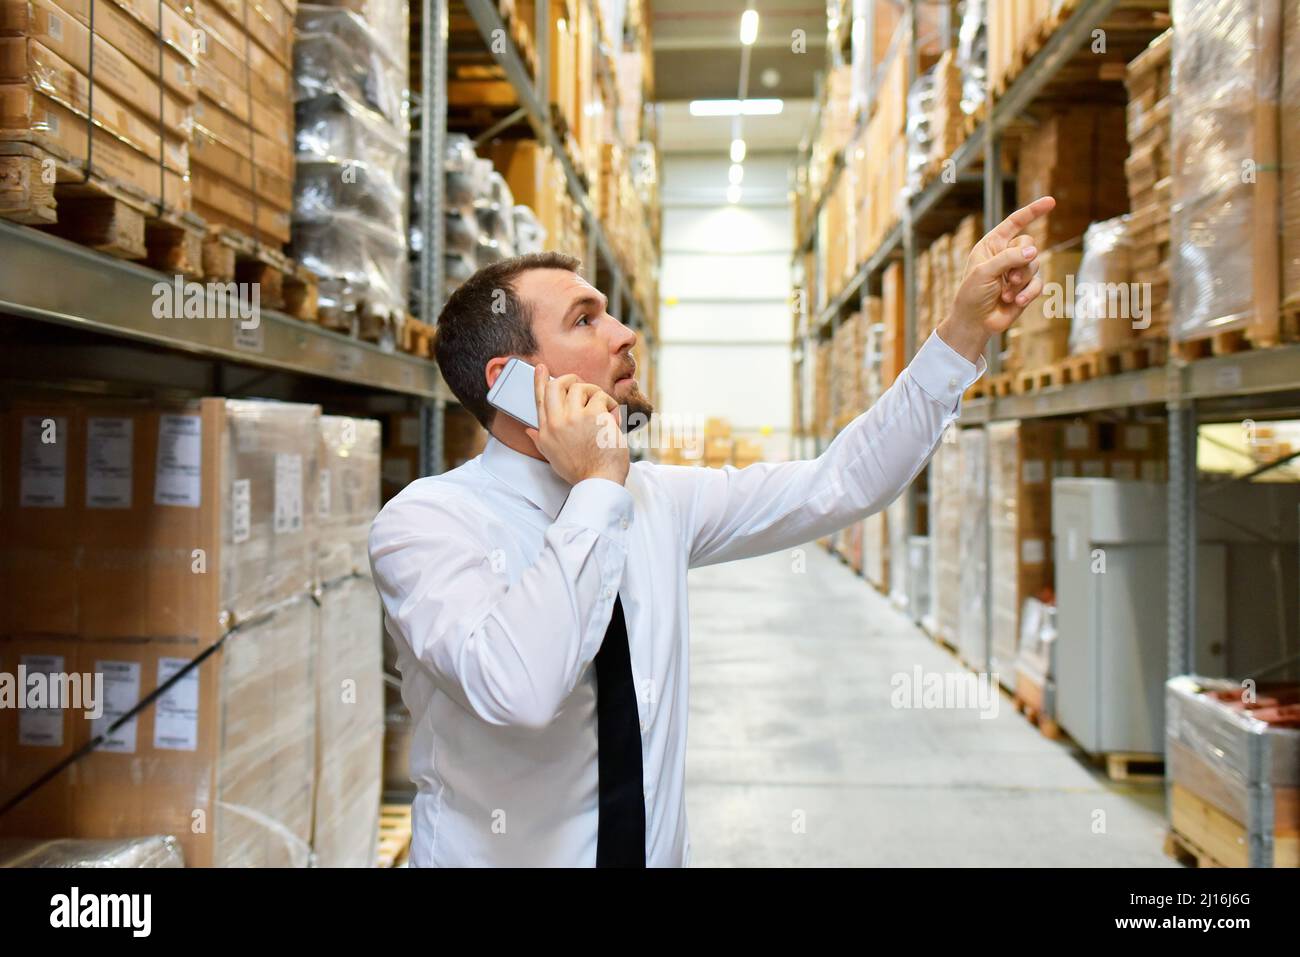 businessman/manager on the phone in the warehouse of a company Stock Photo